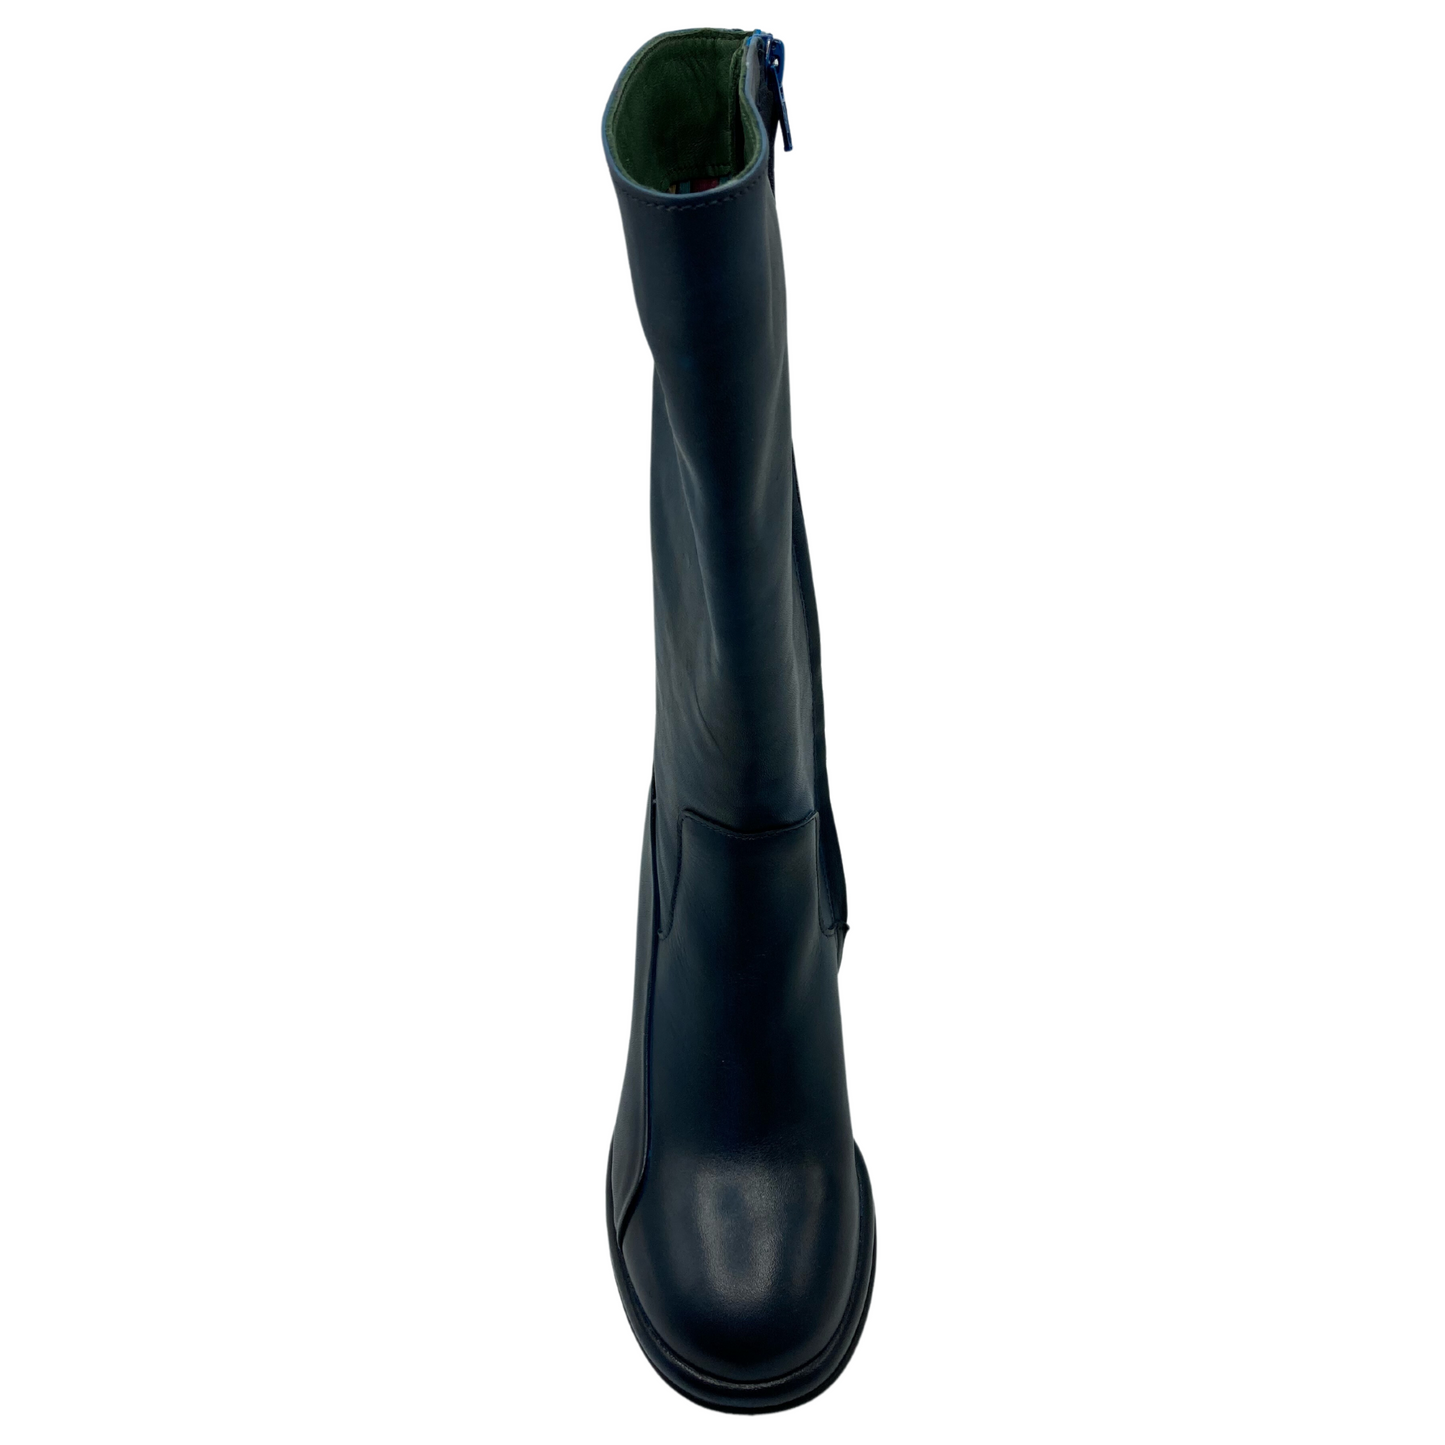 Frontal view of dark blue leather boot with rounded toe and calf-height shaft